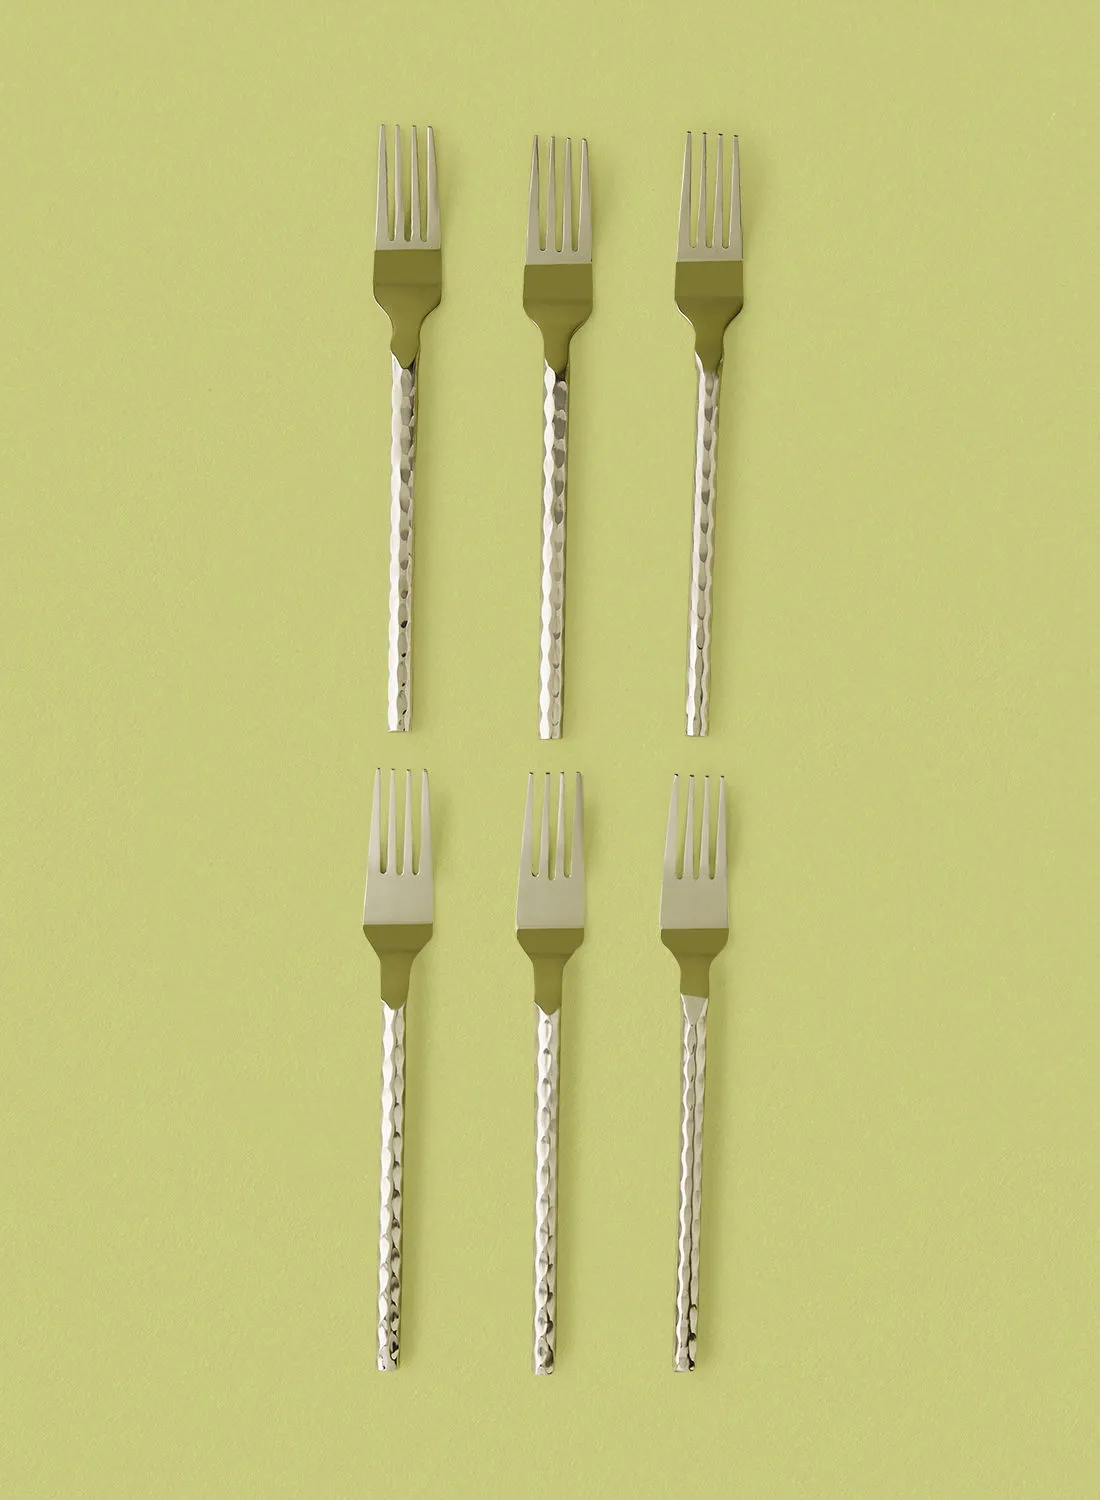 noon east 6 Piece Forks Set - Made Of Stainless Steel - Silverware Flatware - Fork Set - Serves 6 - Design Silver Bamboo